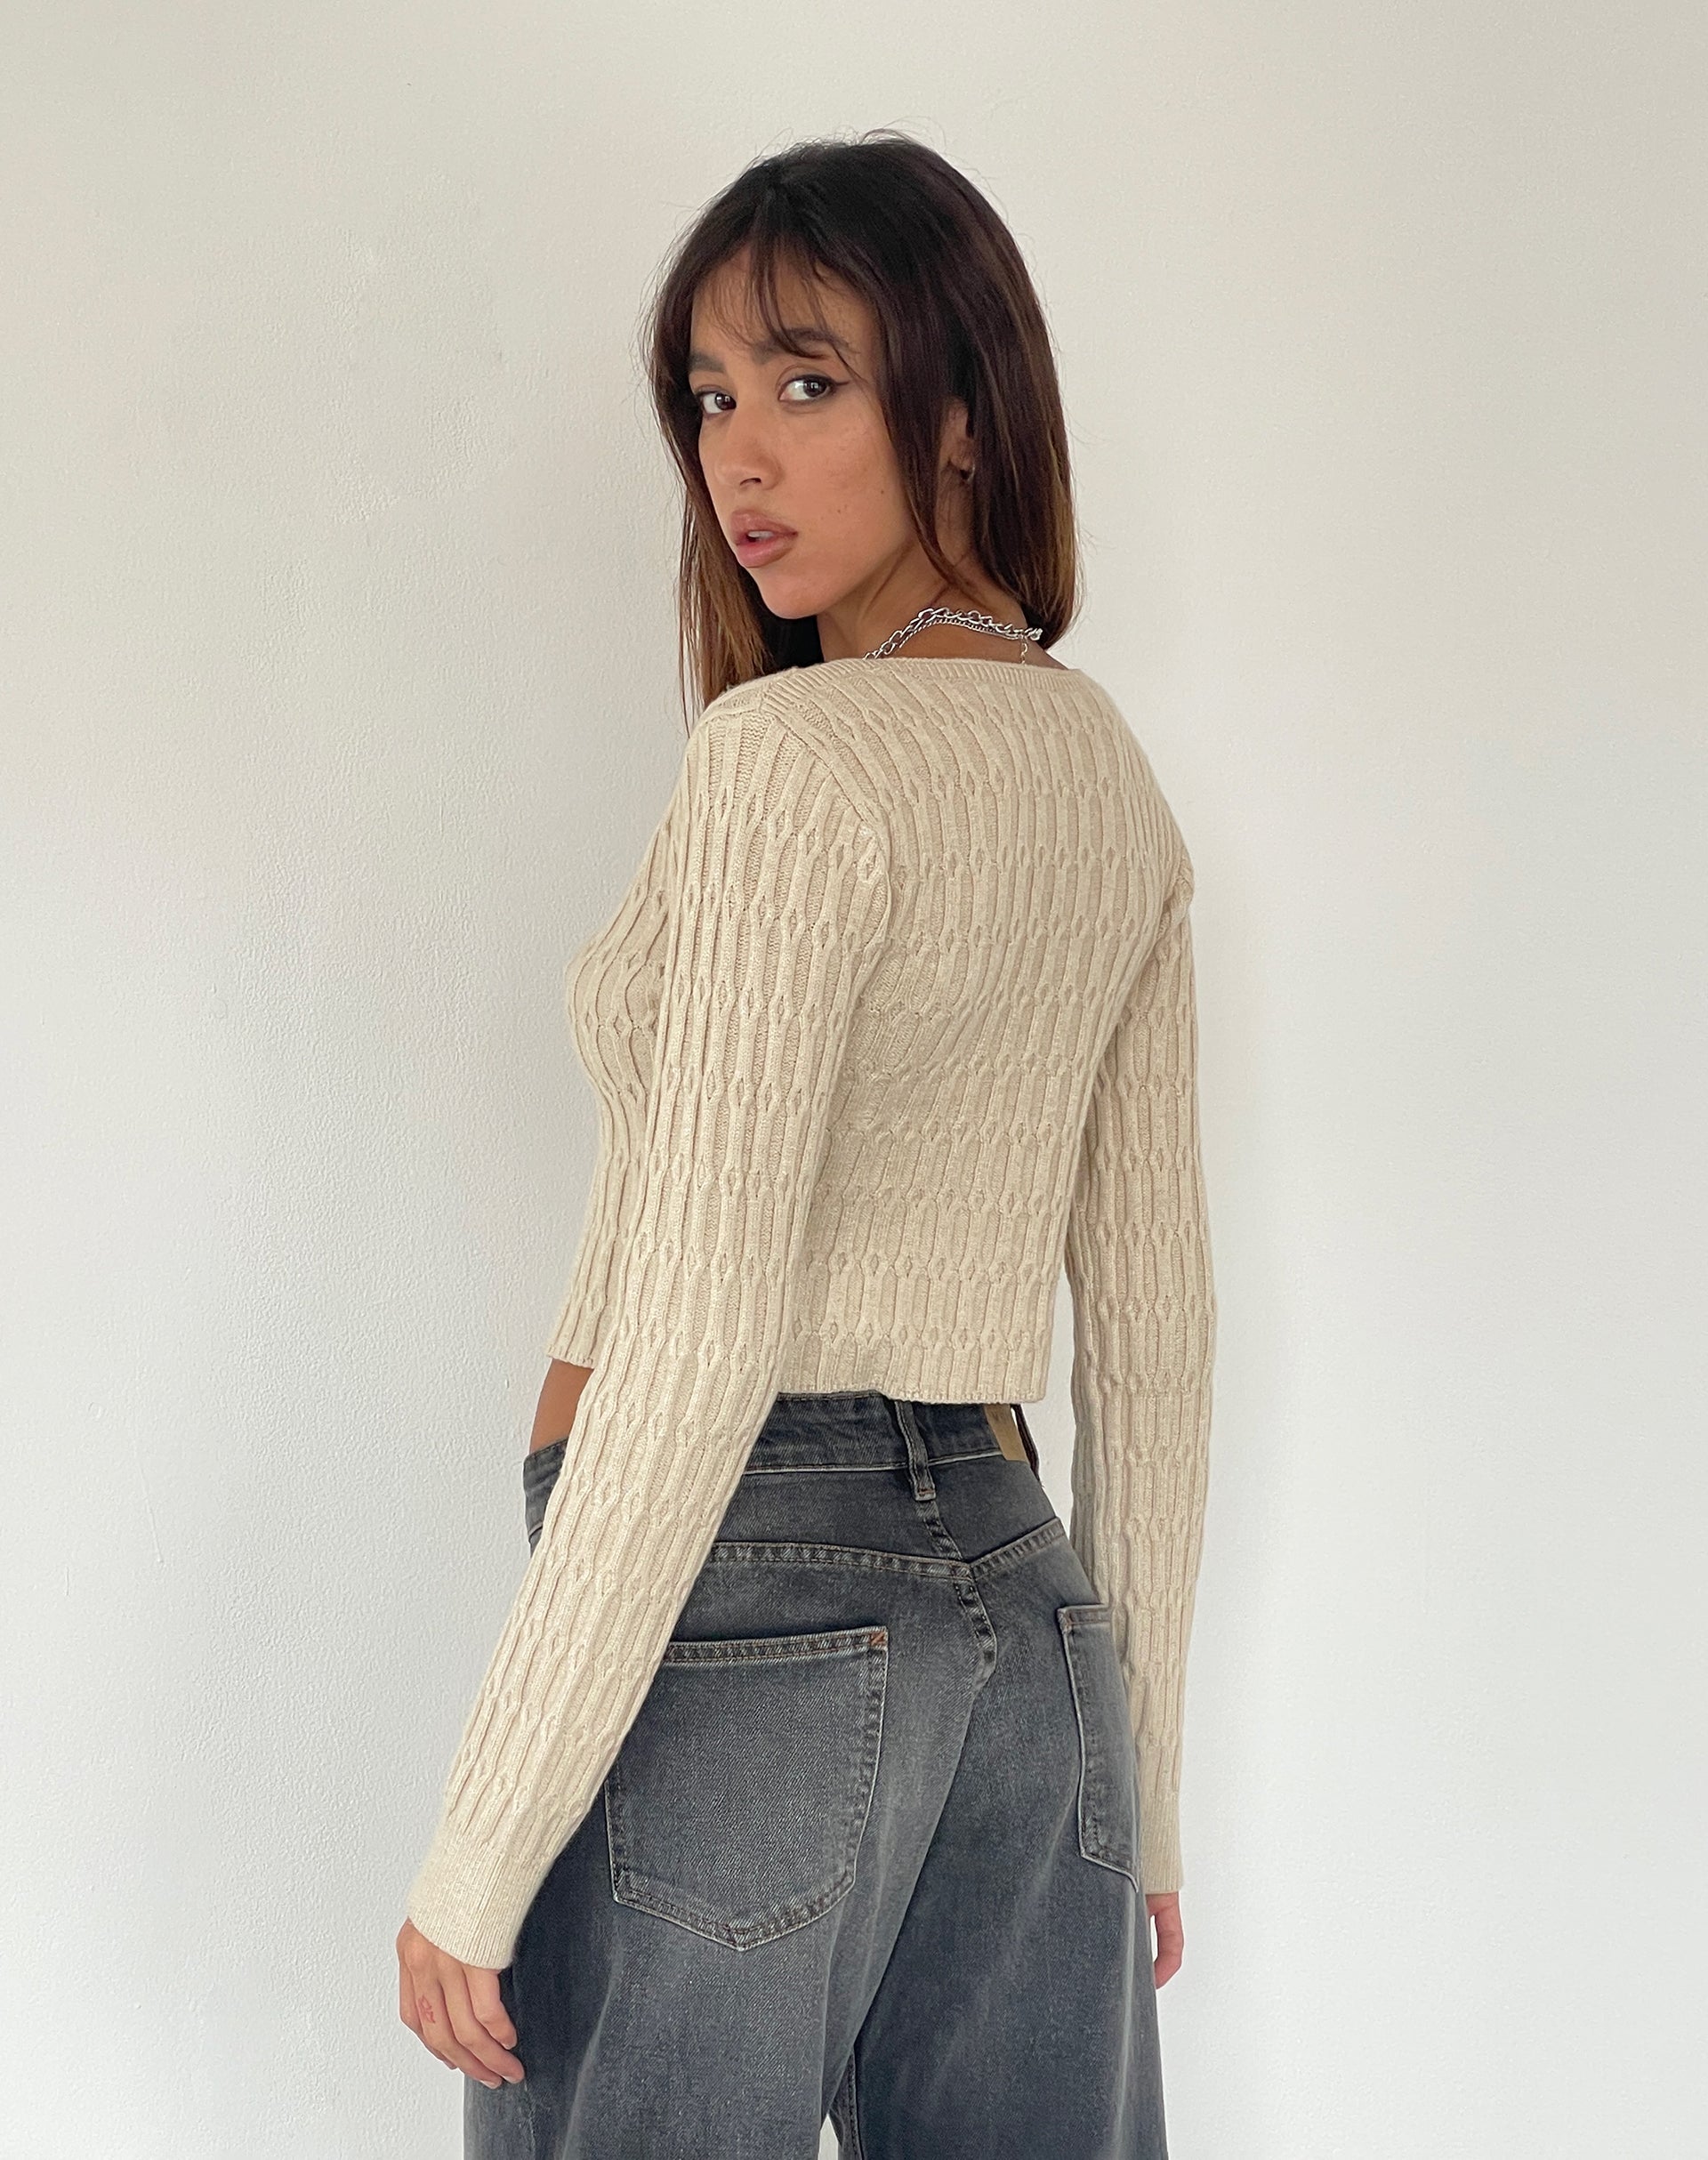 Image of Mohara Long Sleeve Butterfly Top in Neutral Knit